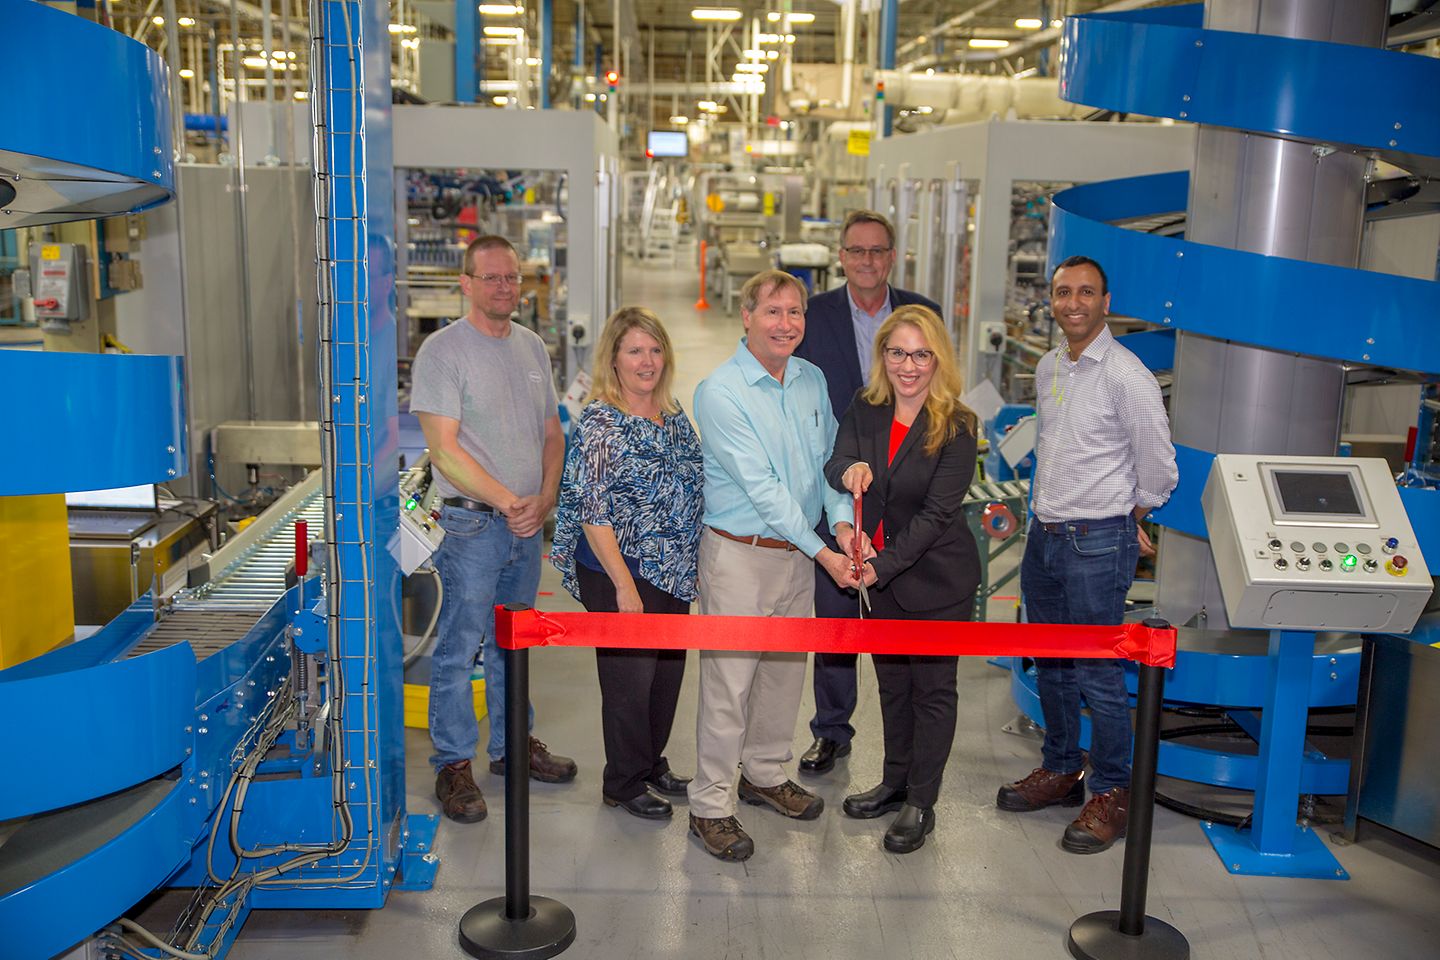 Leaders from the West Hazleton facility, and the Beauty Care leadership team, celebrate the opening of the line expansion for both Dial® body wash and Dial® liquid hand soap.